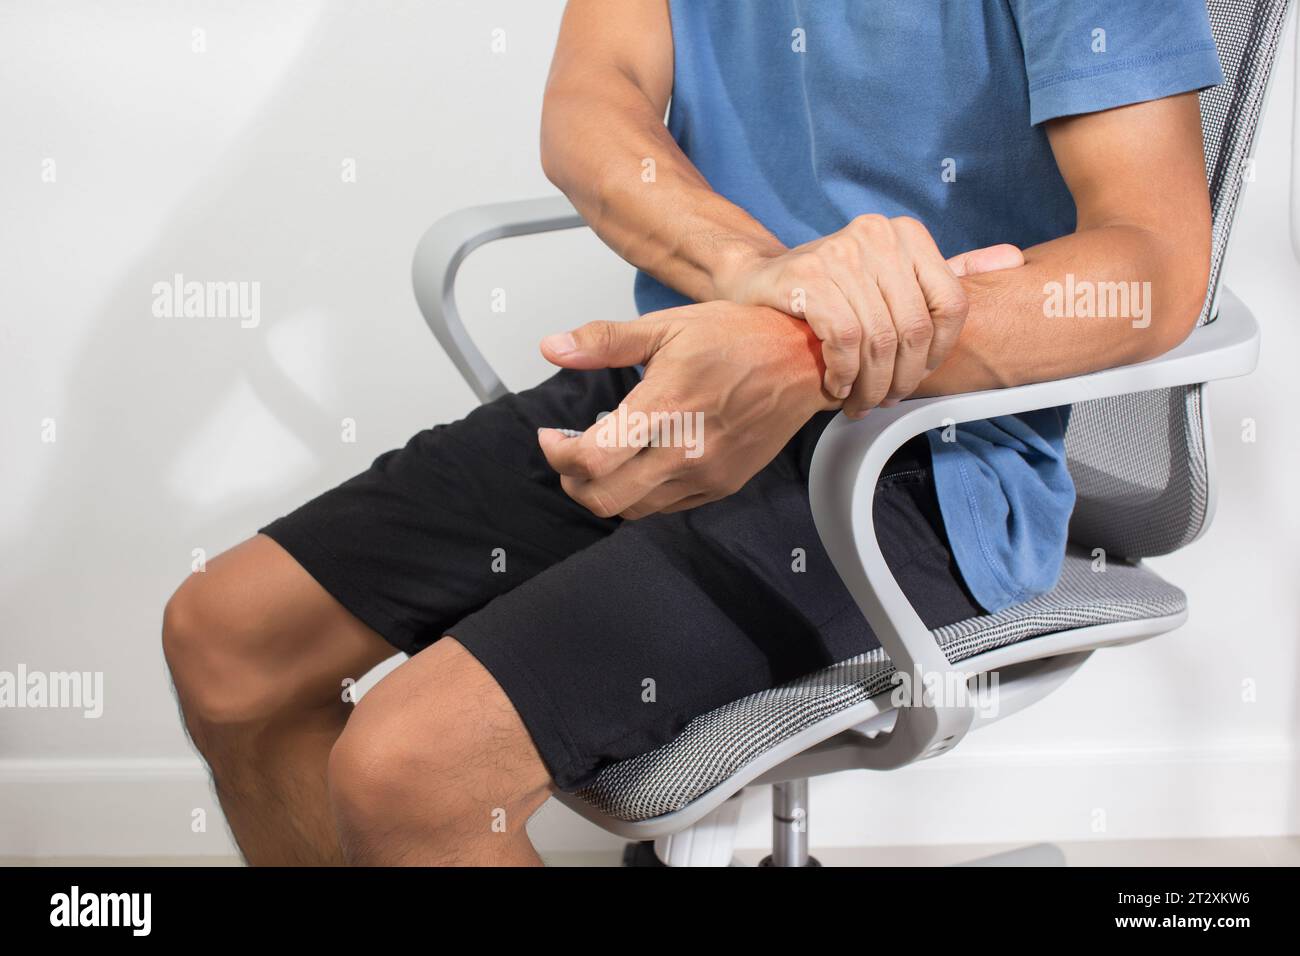 The man has numbness in the wrist. Health care and body care concept. Stock Photo